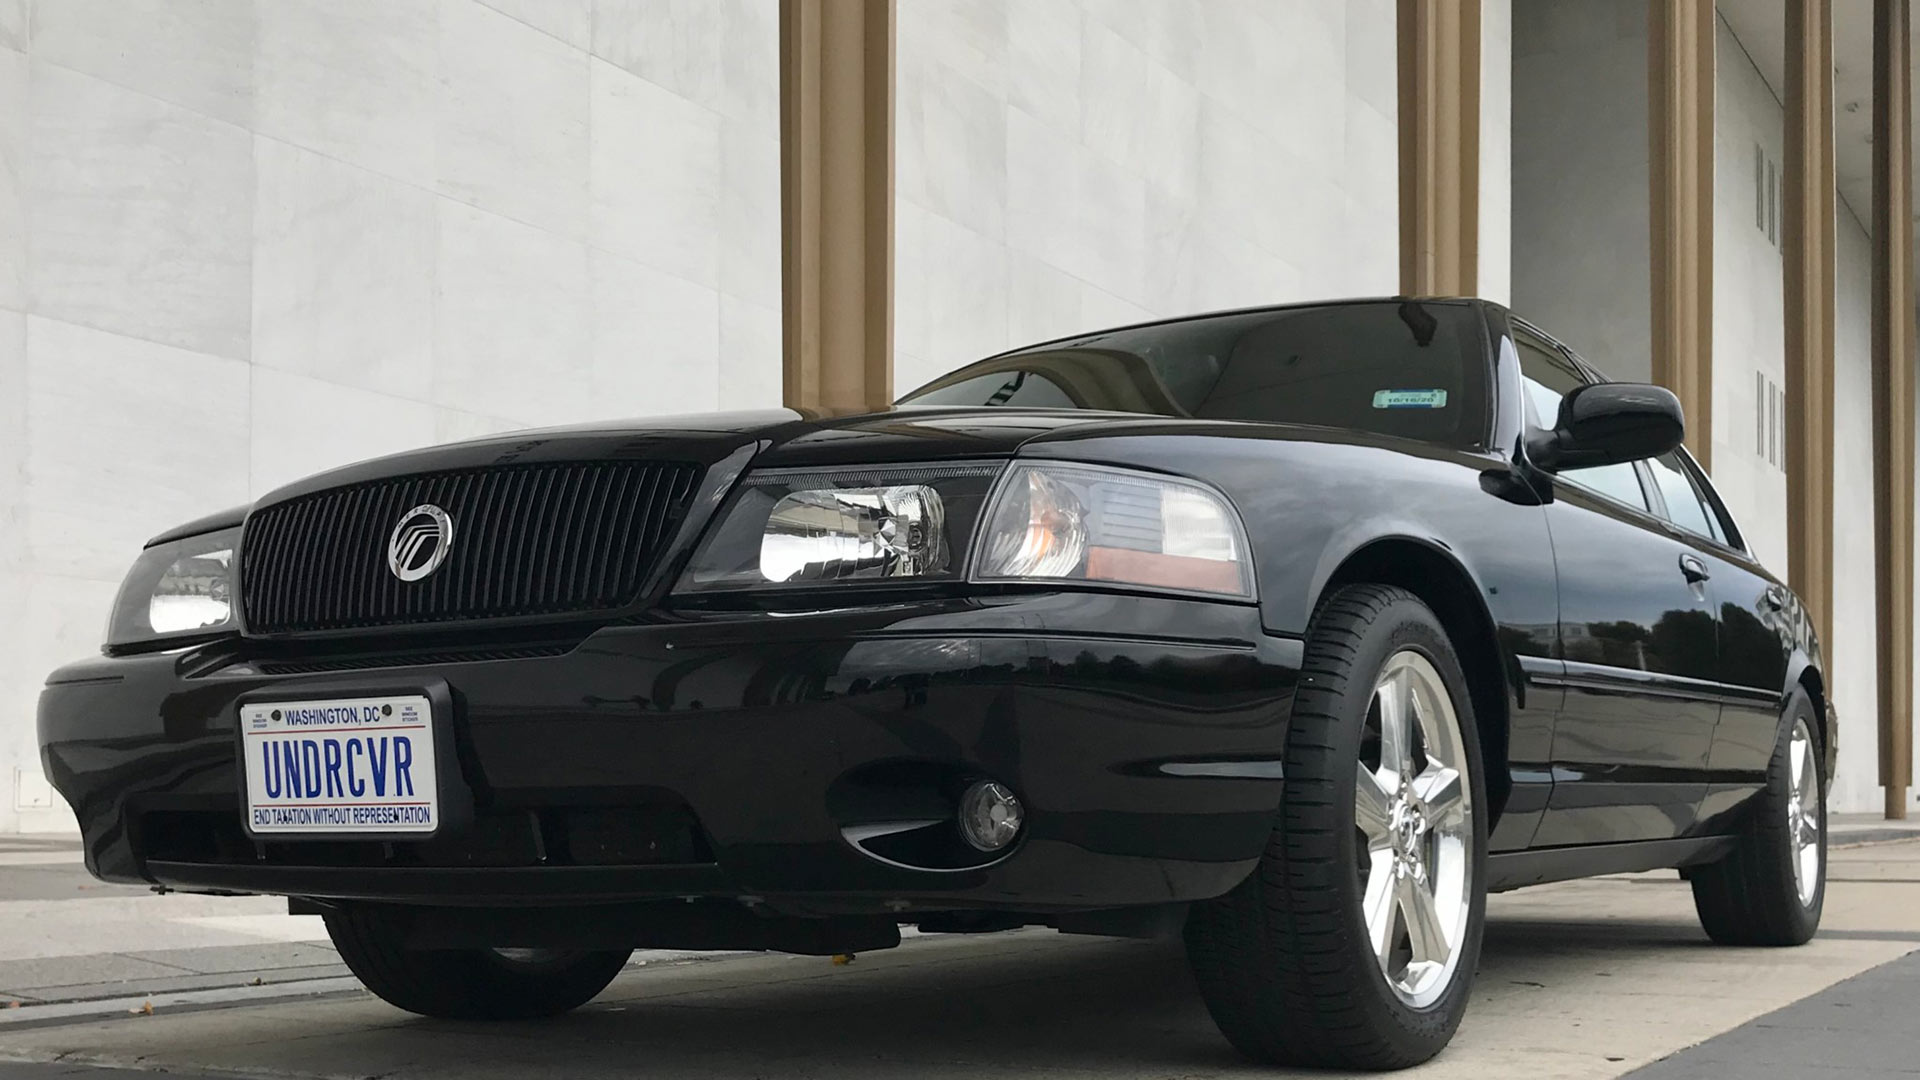 This sinister 2003 Mercury Marauder could be a perfect Cyber Monday